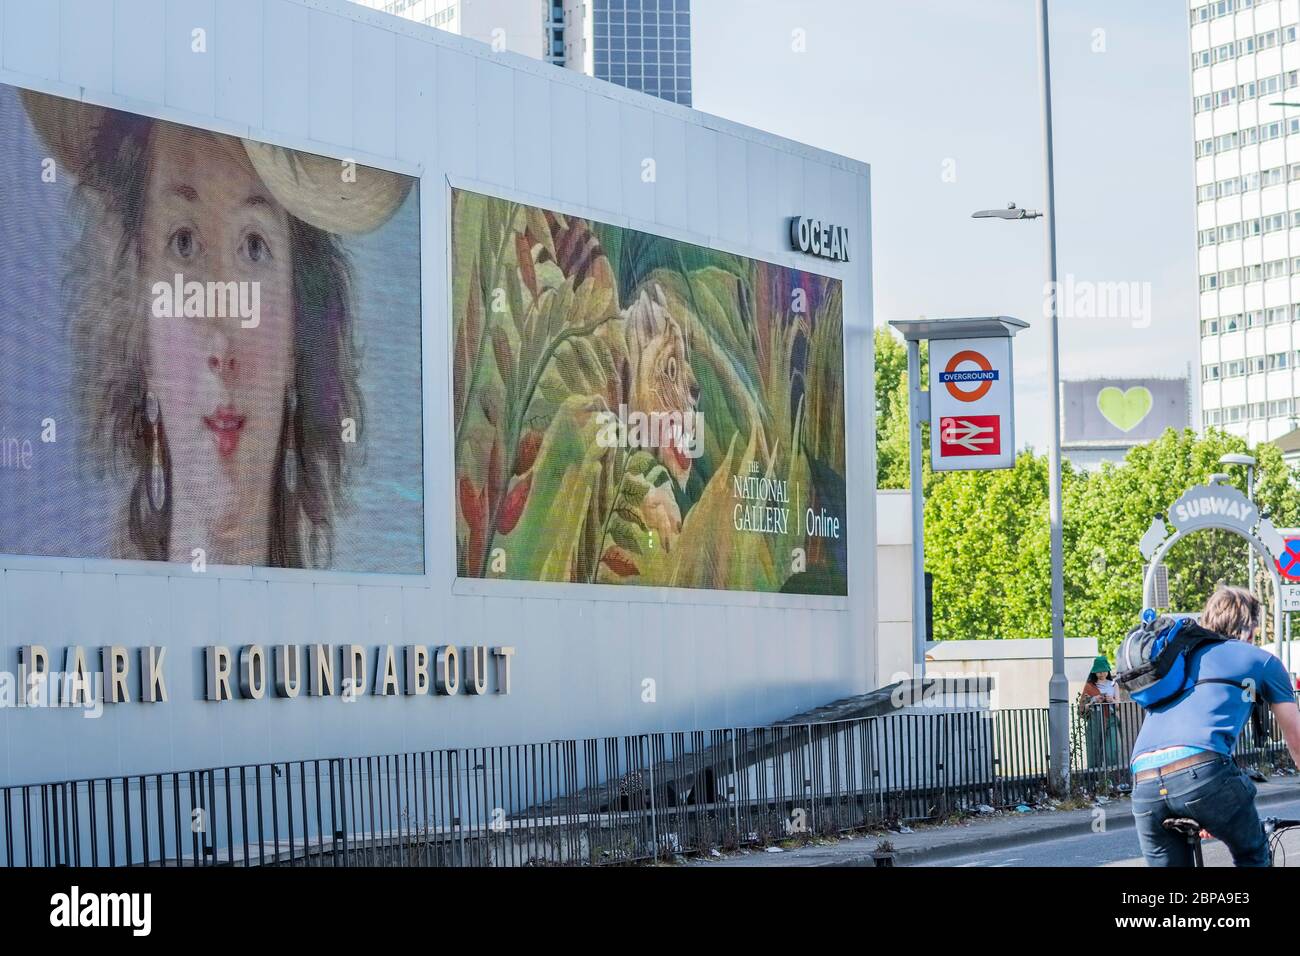 London, UK. 18th May 2020. The National Gallery has teamed up with digital outdoor screen provider, Ocean Outdoor, to bring orks of art out from behind the Gallery's temporarily closed doors (in this case at the Shepherd's Bush Roundabout supersite with the Grenfell Tower heart in the background). The digital sites are free for the next two weeks in order to display images of seven of the Gallery's most iconic paintings: Van Gogh's Sunflowers (1888) and A Wheatfield, with Cypresses (1889), Monet's The Water-Lily Pond (1899), van Eyck's The Arnolfini Portrait (1434), Seurat's Bathers at Asnière Stock Photo